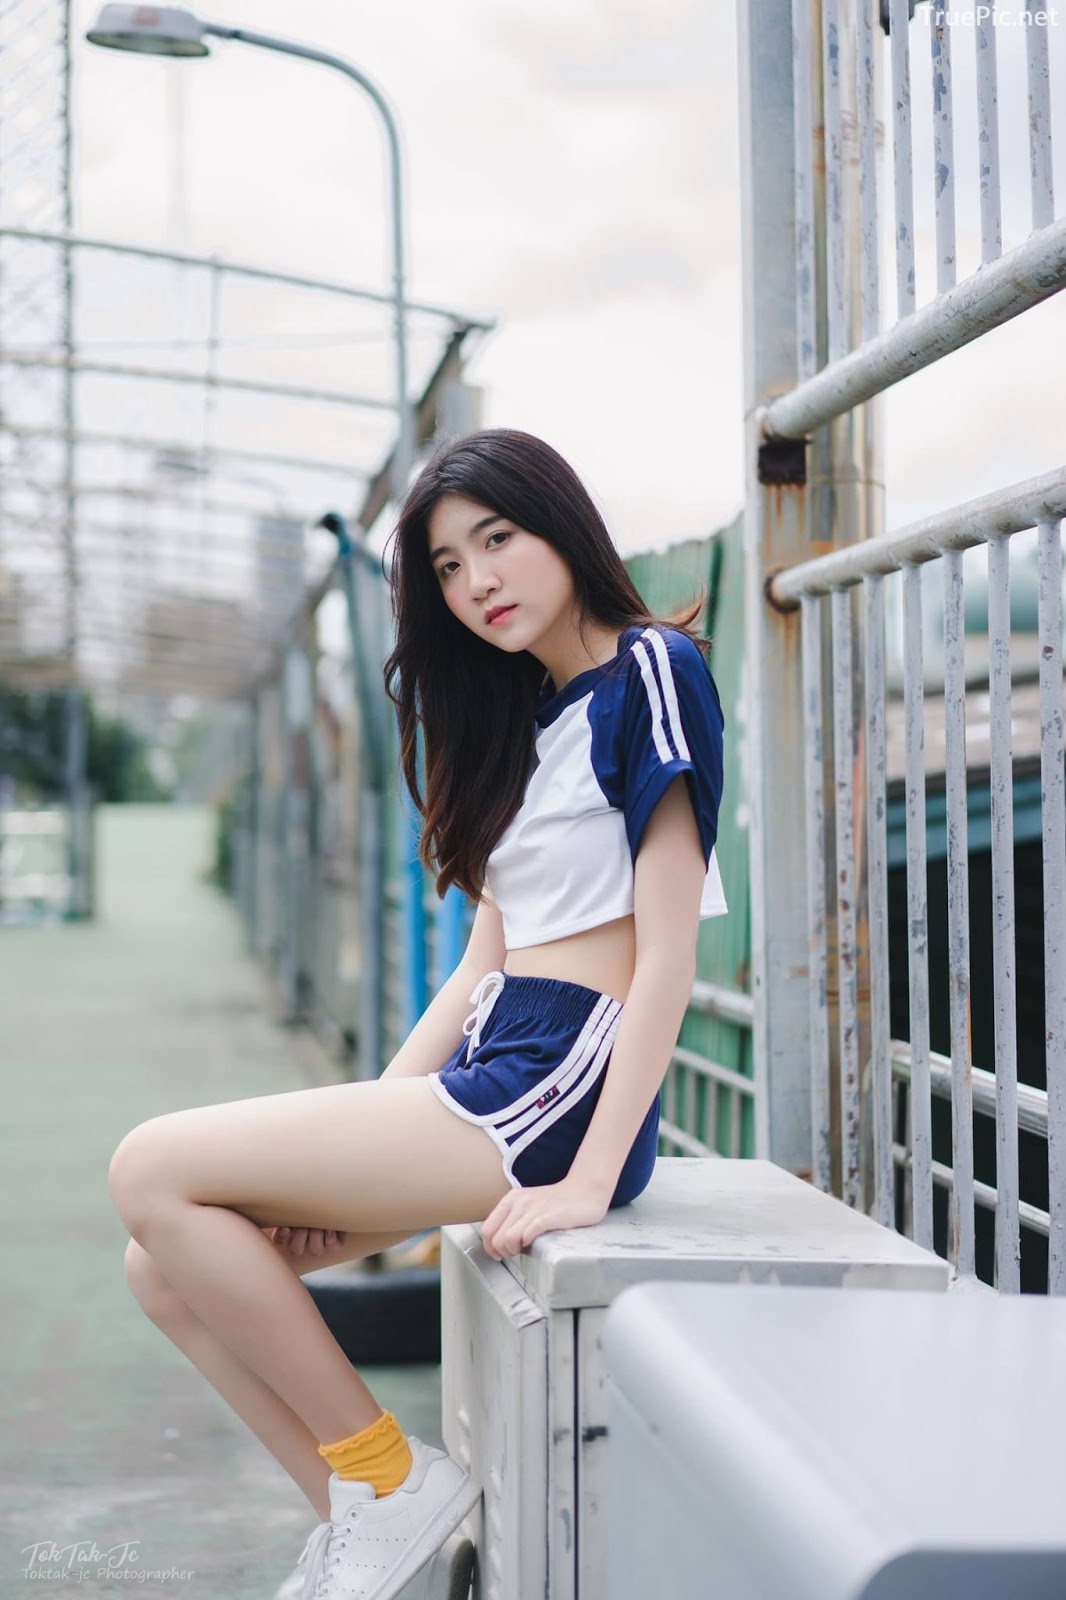 Hot Girl Thailand - Sasi Ngiunwan - Scenes From an Empty City - TruePic.net - Picture 2